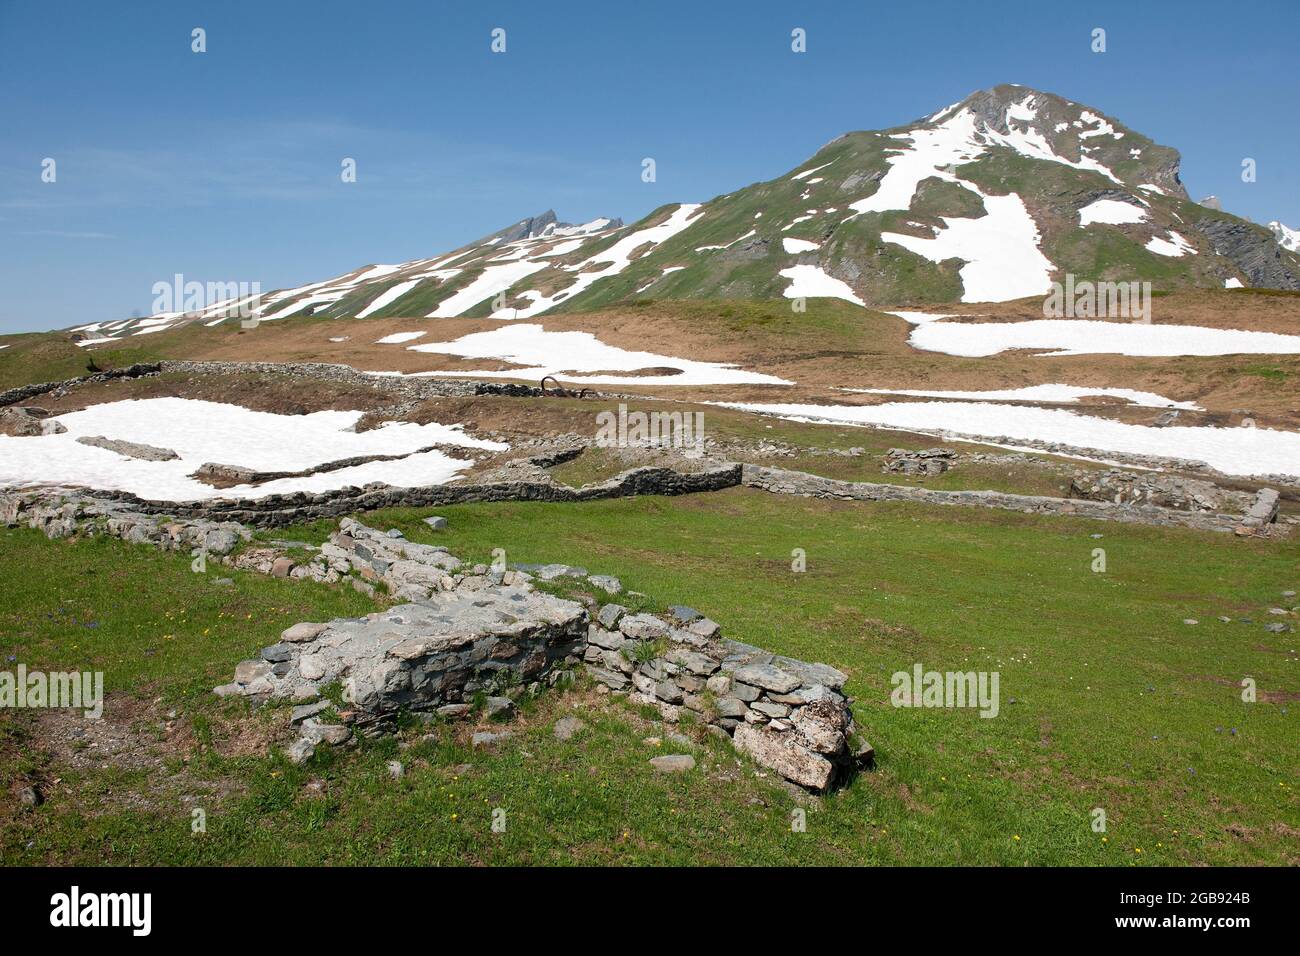 Archaeological soil find, historical foundation walls from Roman times, Little Saint Bernard Pass, La Thuile, Aosta Valley, Italy Stock Photo